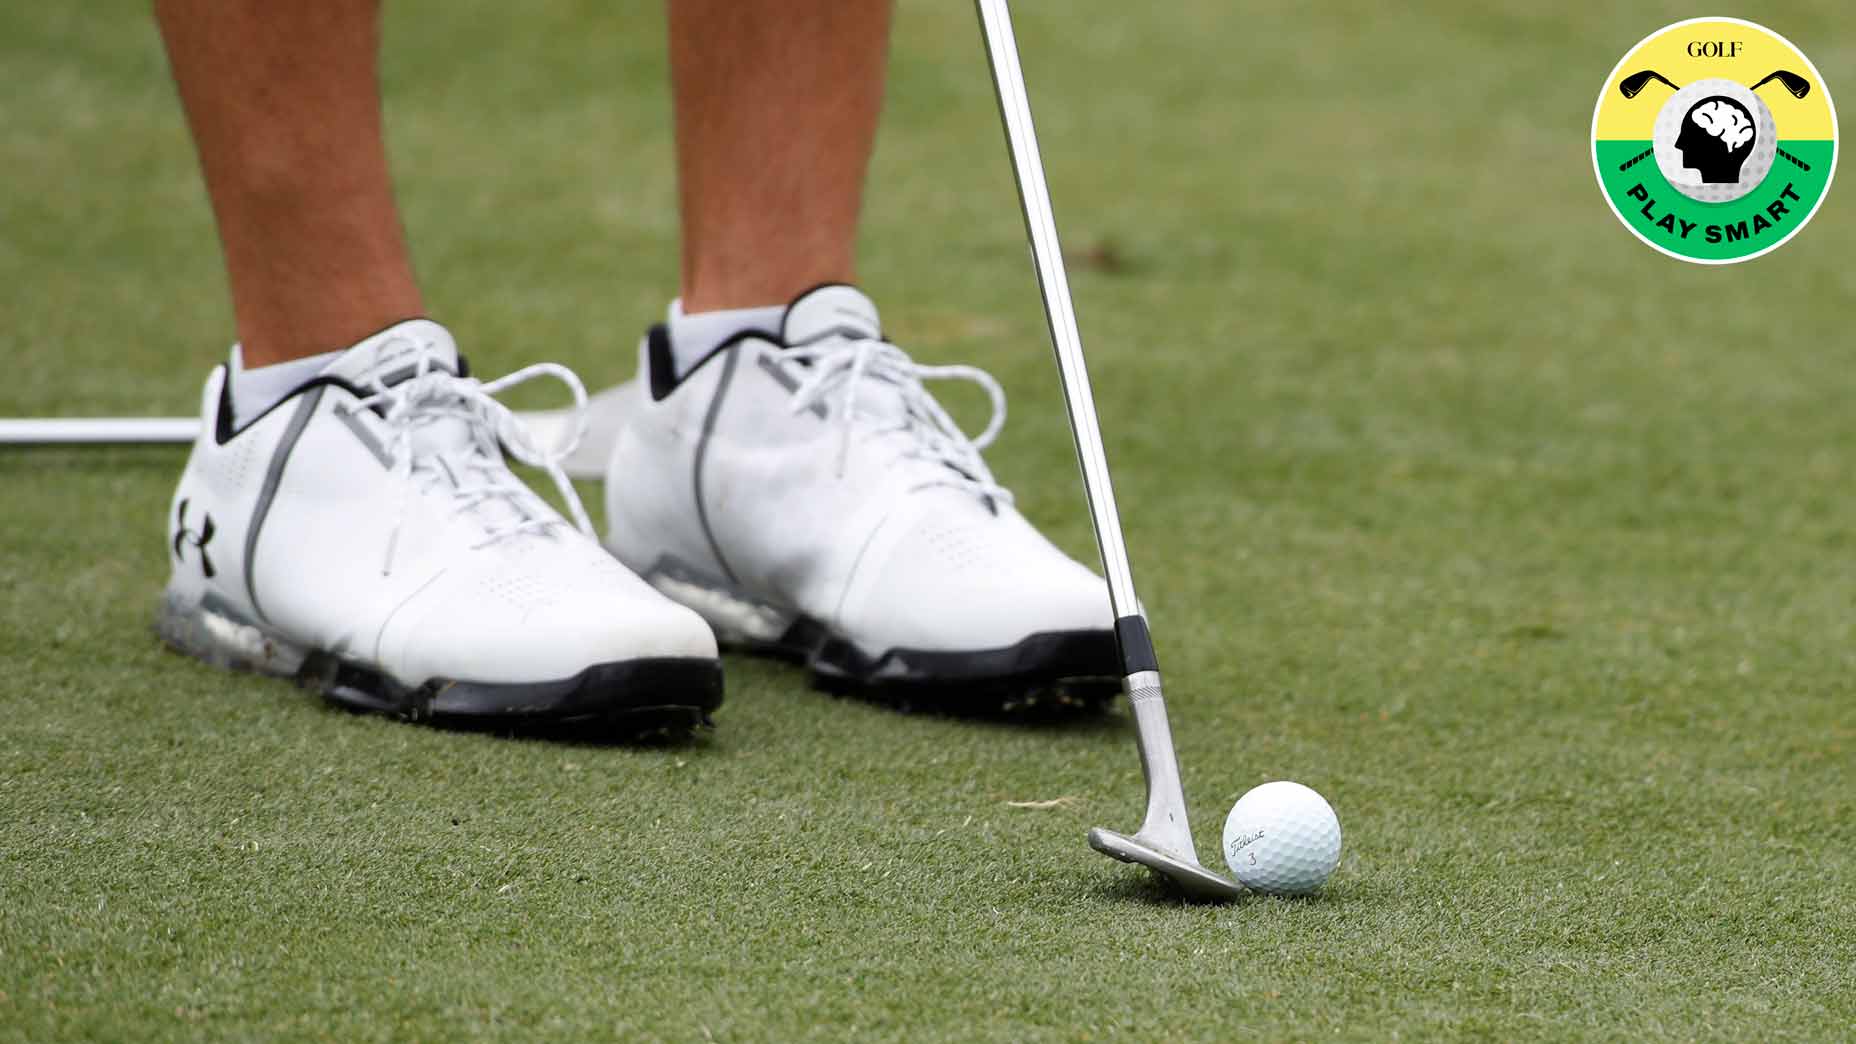 close-up of jordan spieth's wedge and golf ball next to his feet